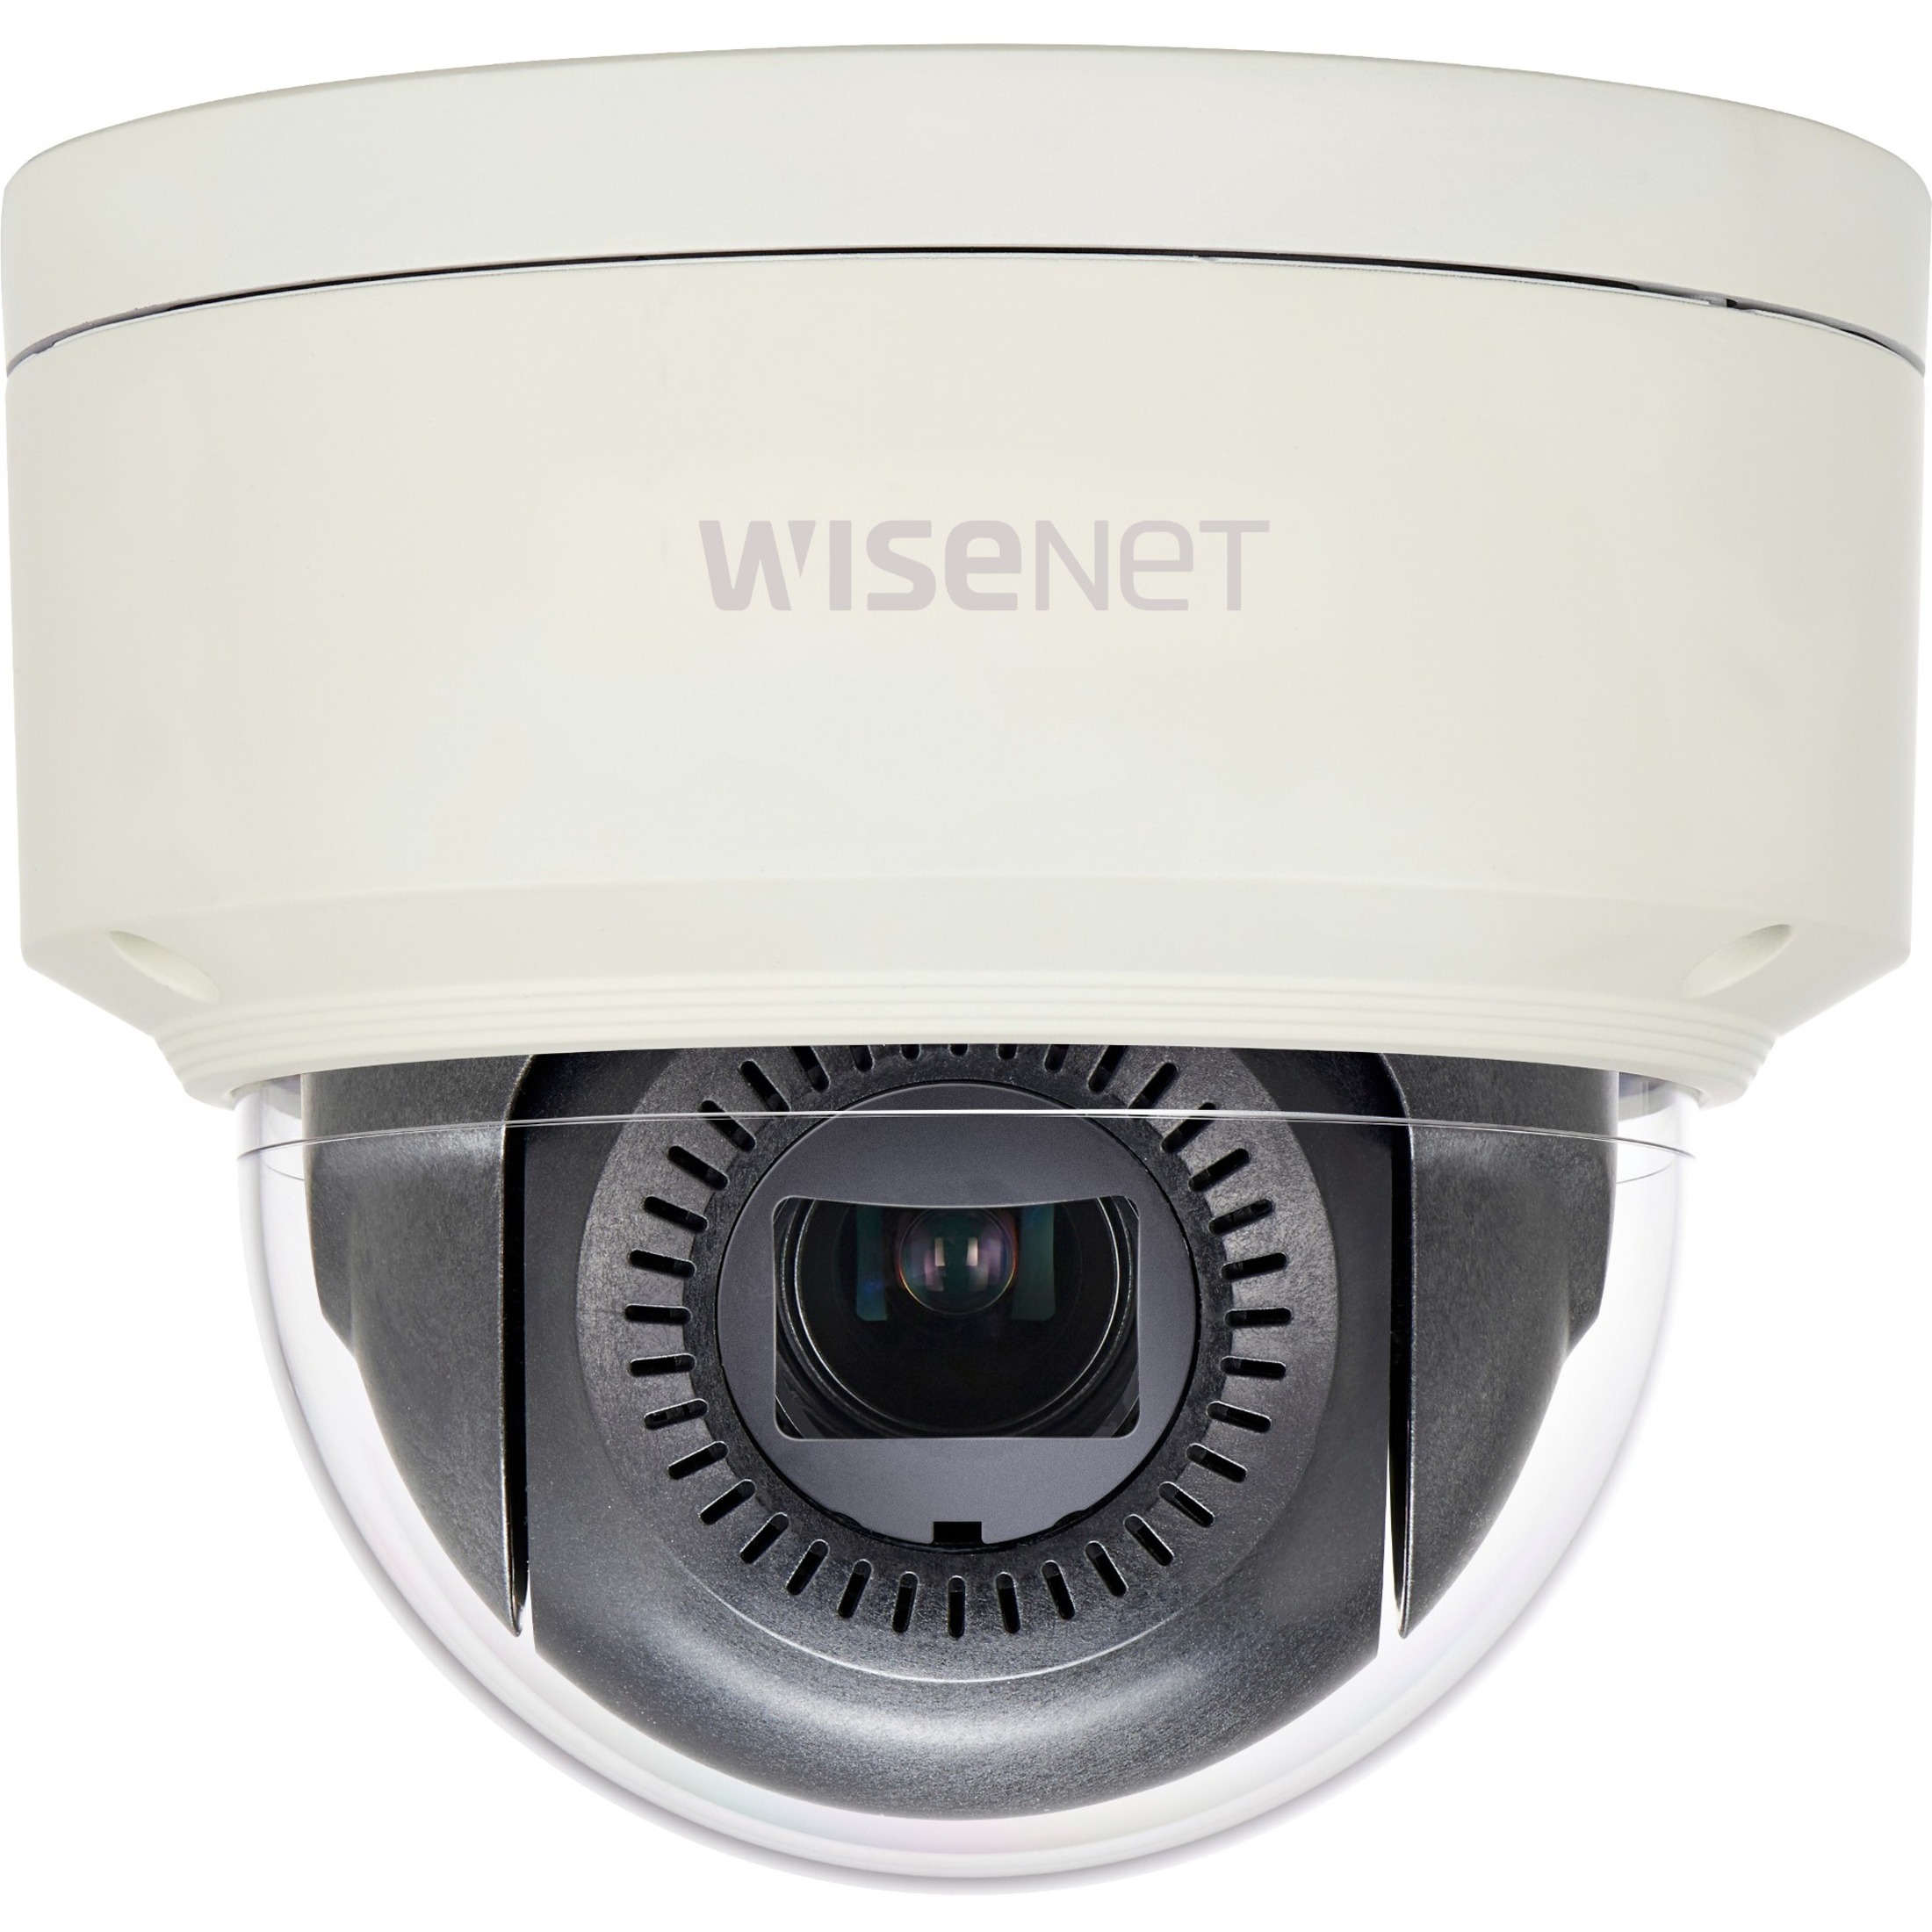 Wisenet extraLUX XNV-6085 2 Megapixel Outdoor Full HD Network Camera, Color, Dome, Ivory - image 2 of 2